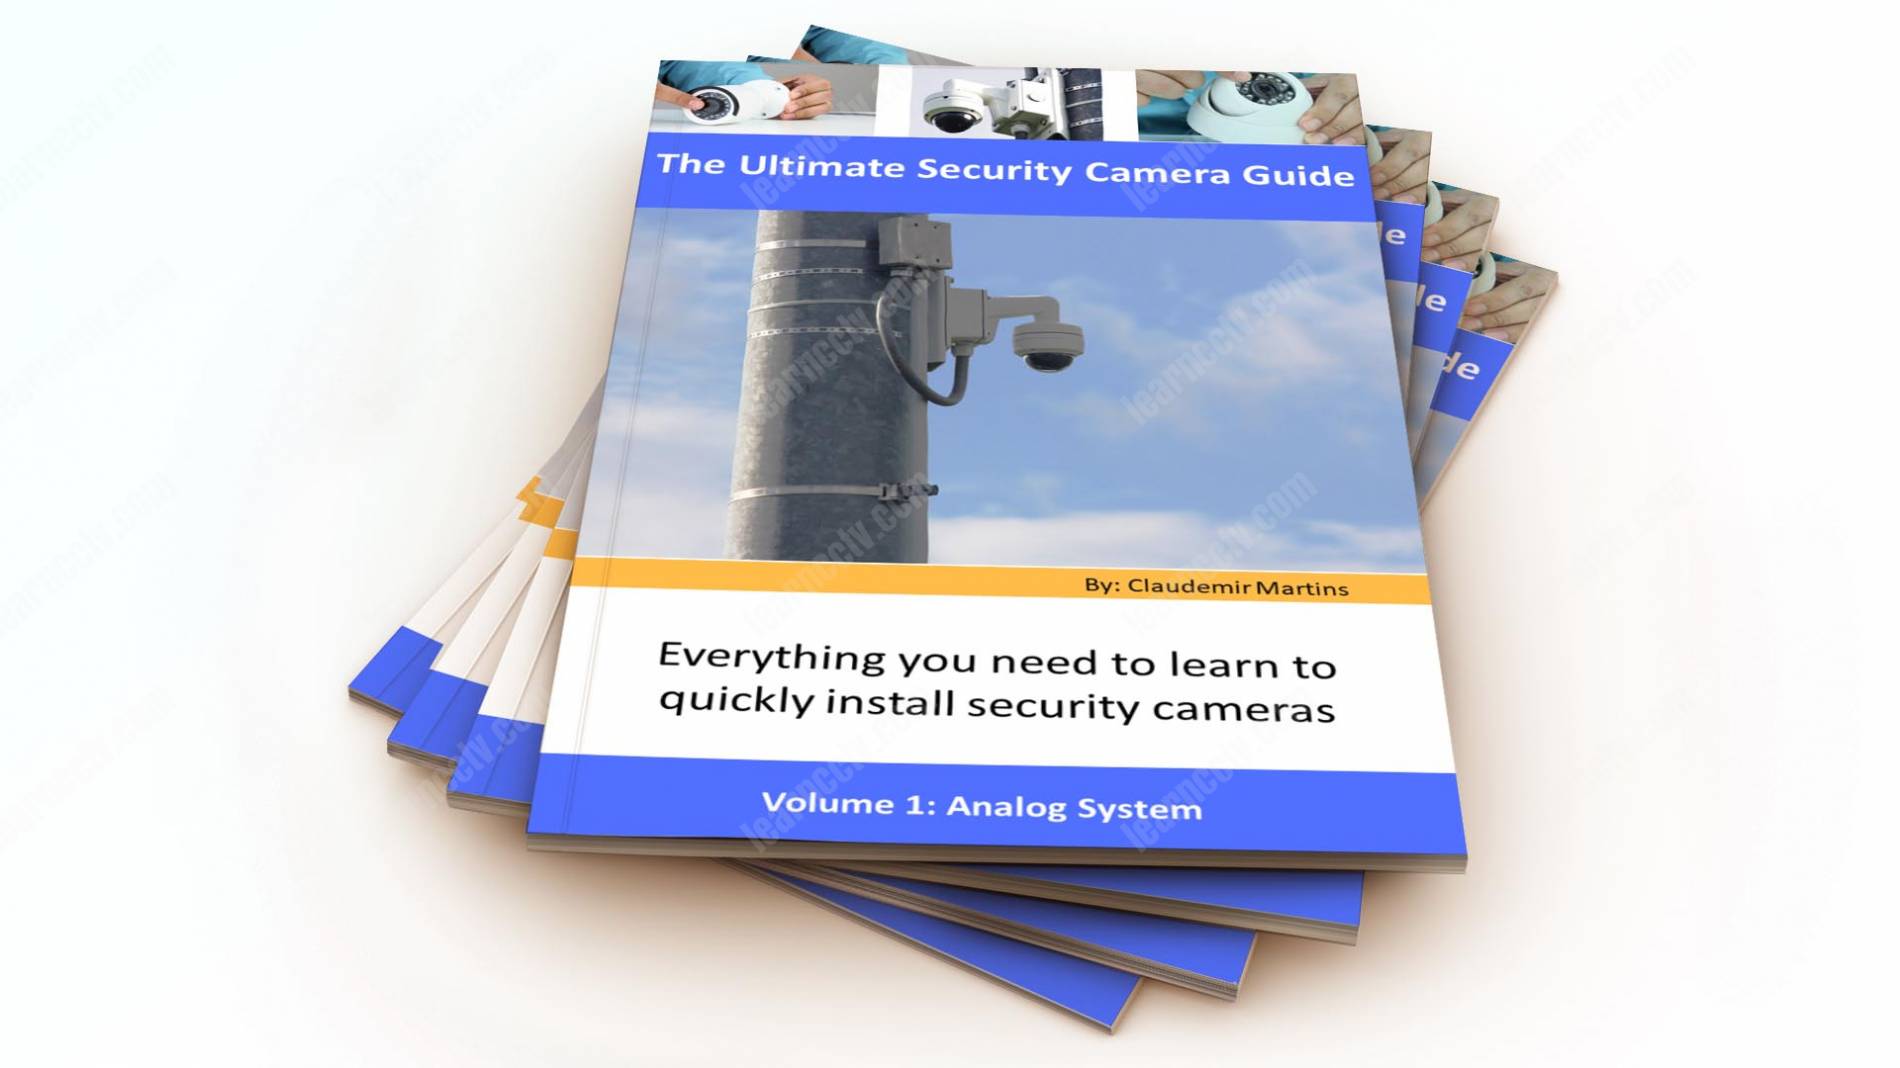 The Ultimate Security Camera Guide